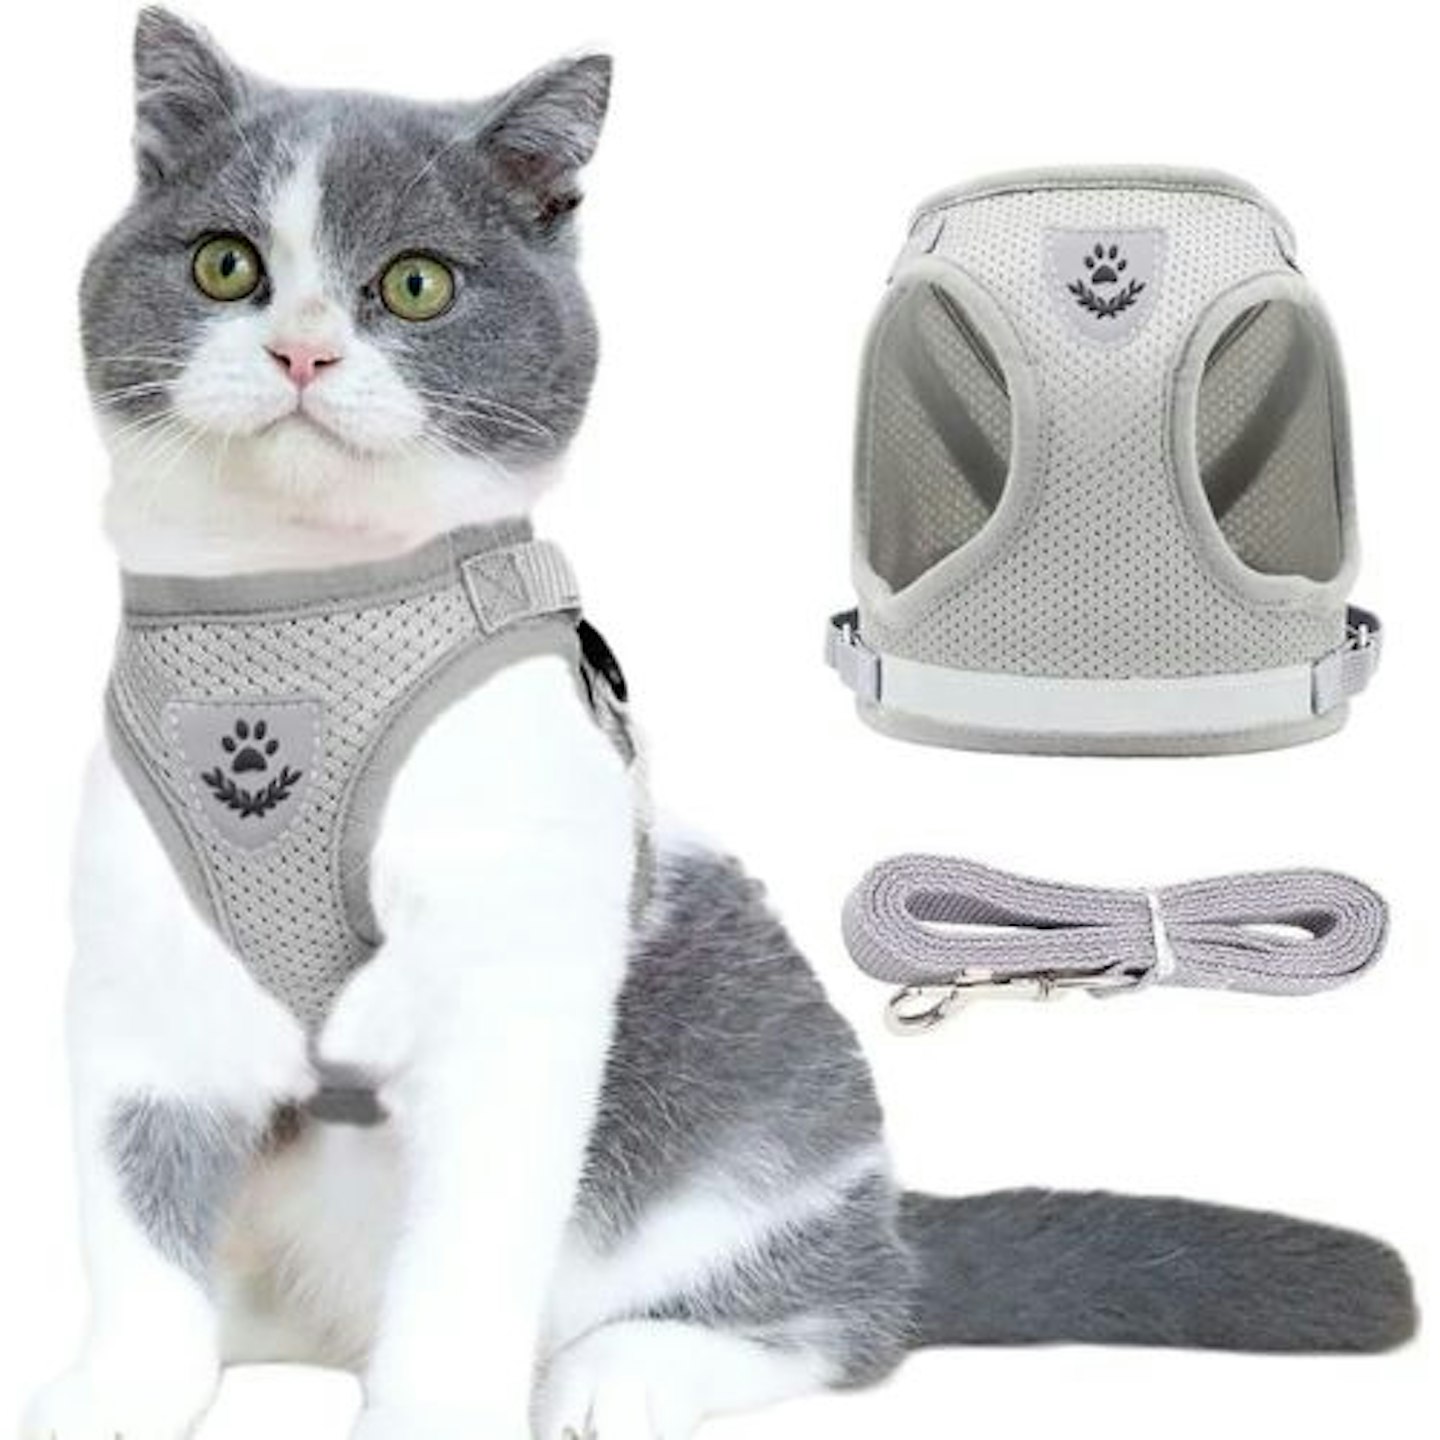 Anlitent Soft Mesh No Pull Cat Harness and Lead Set